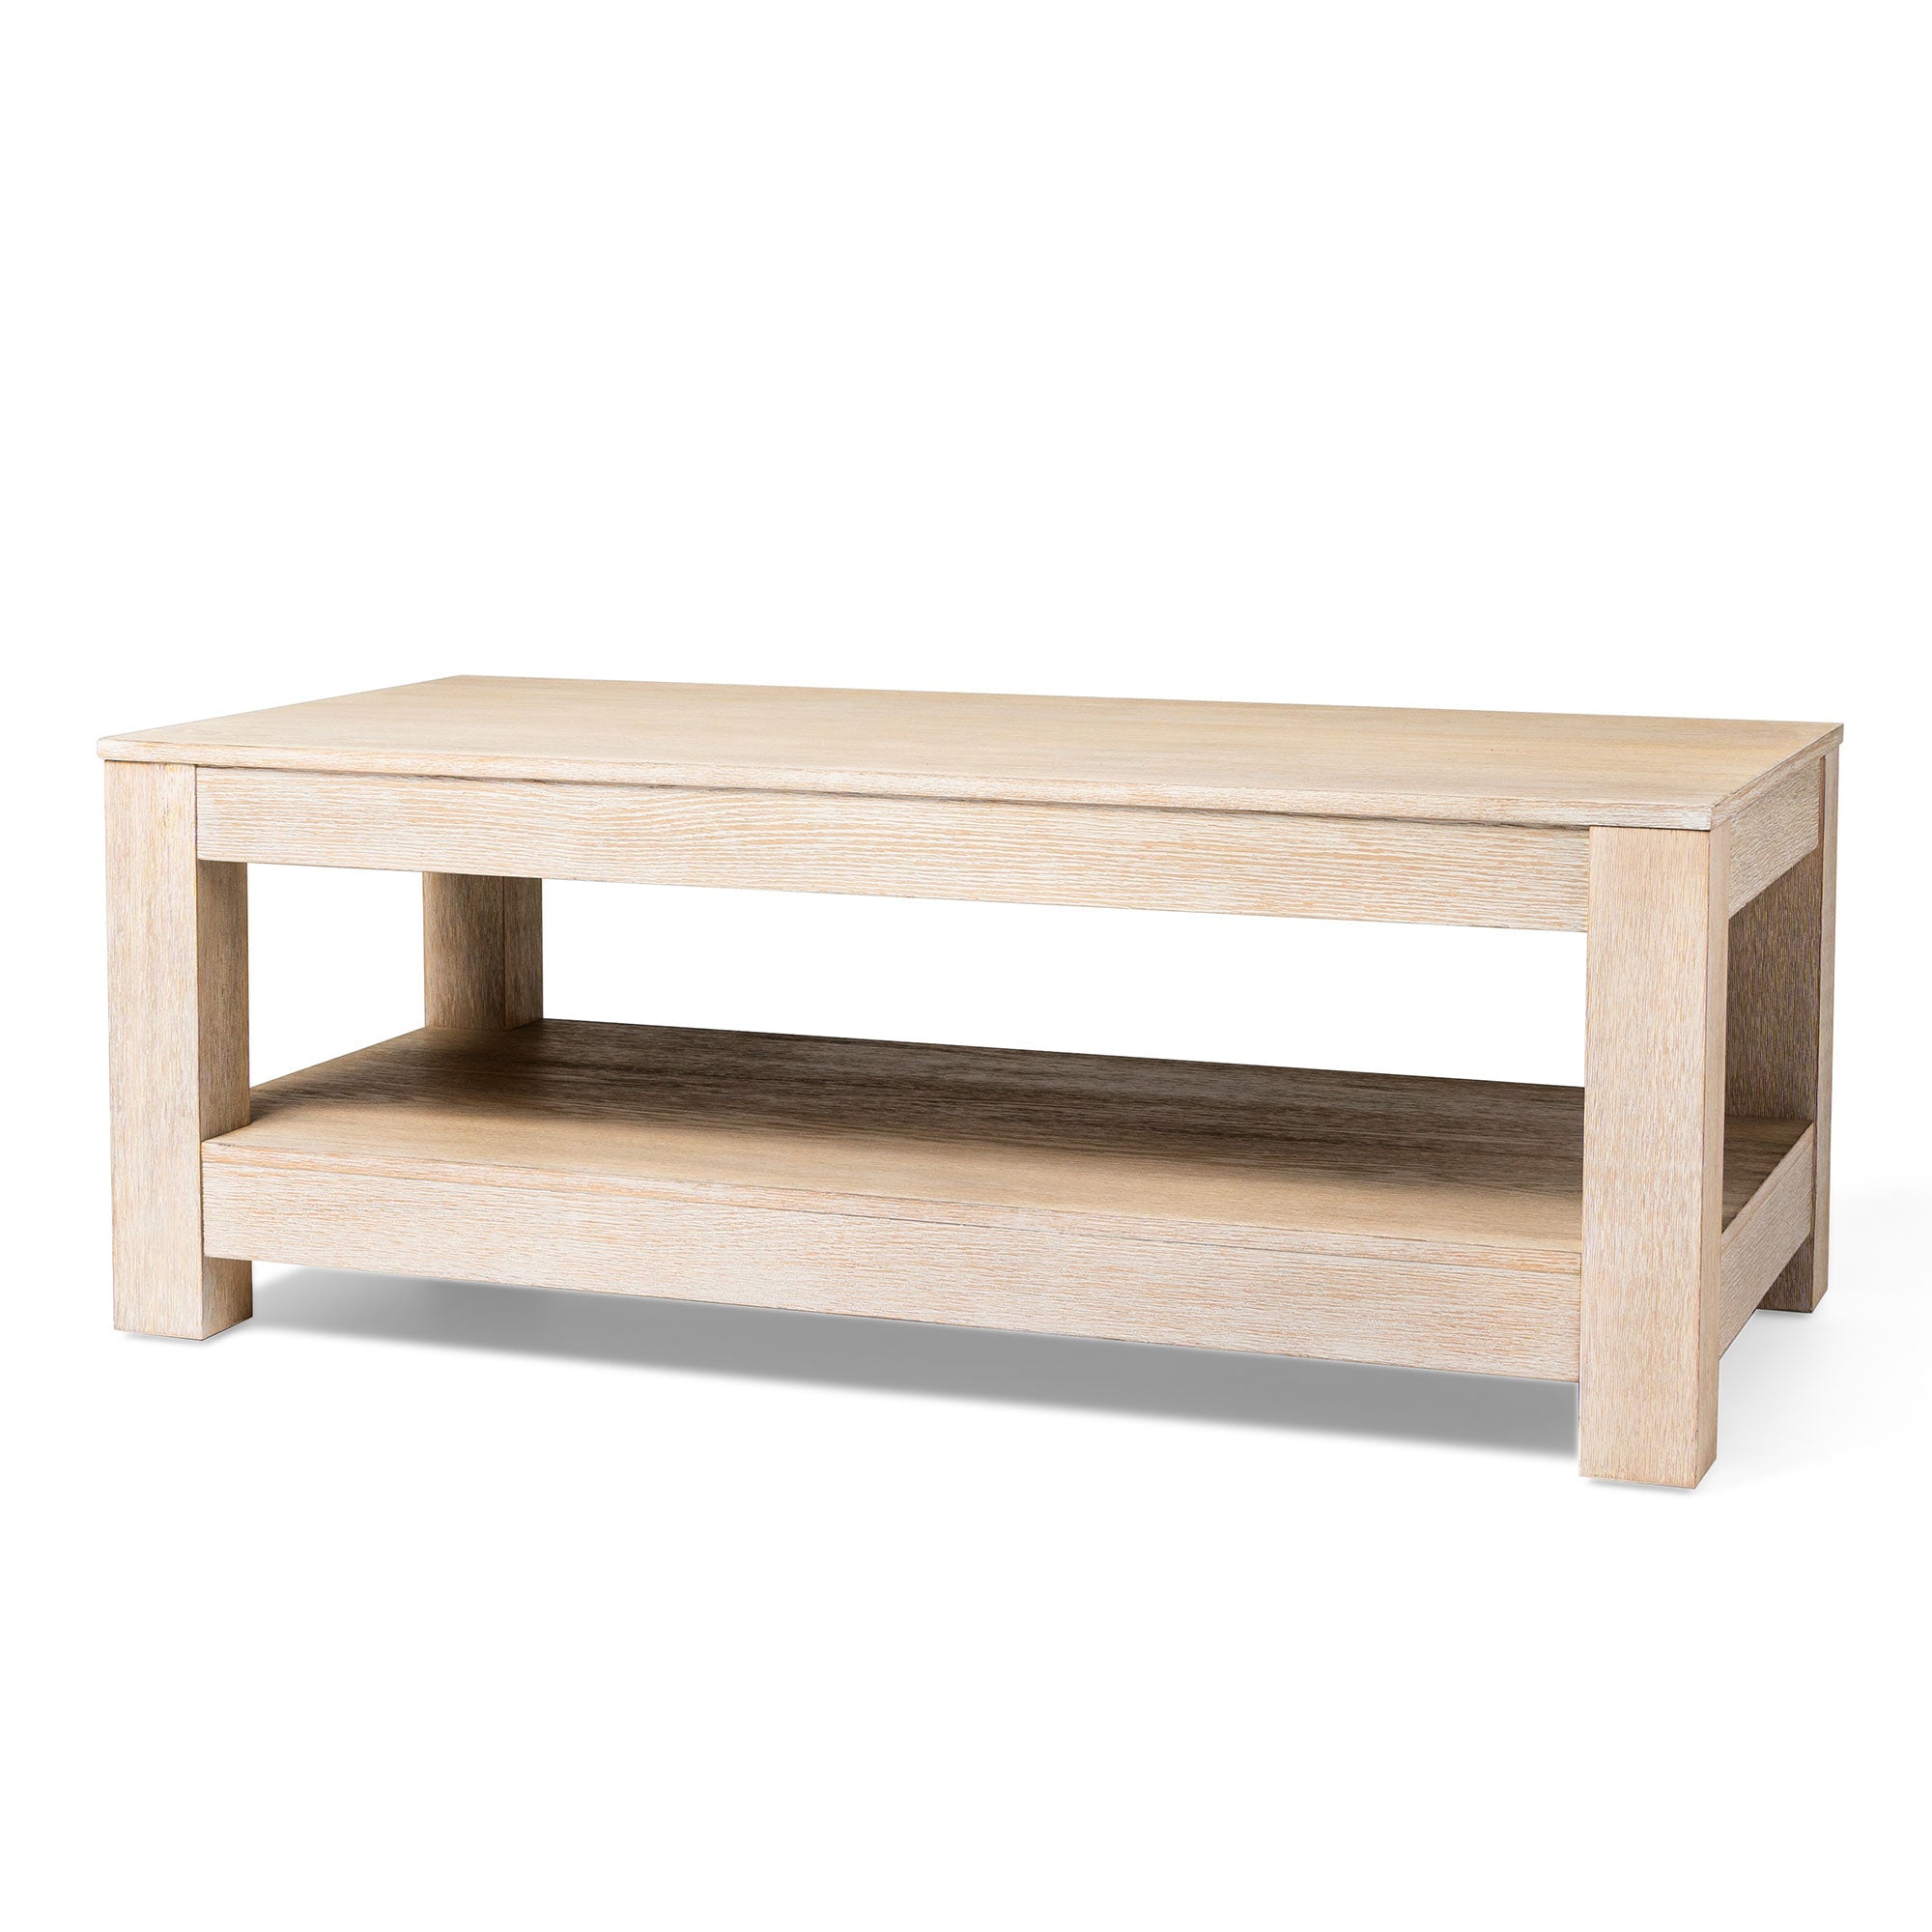 Paulo Wooden Coffee Table in Weathered White Finish in Accent Tables by Maven Lane